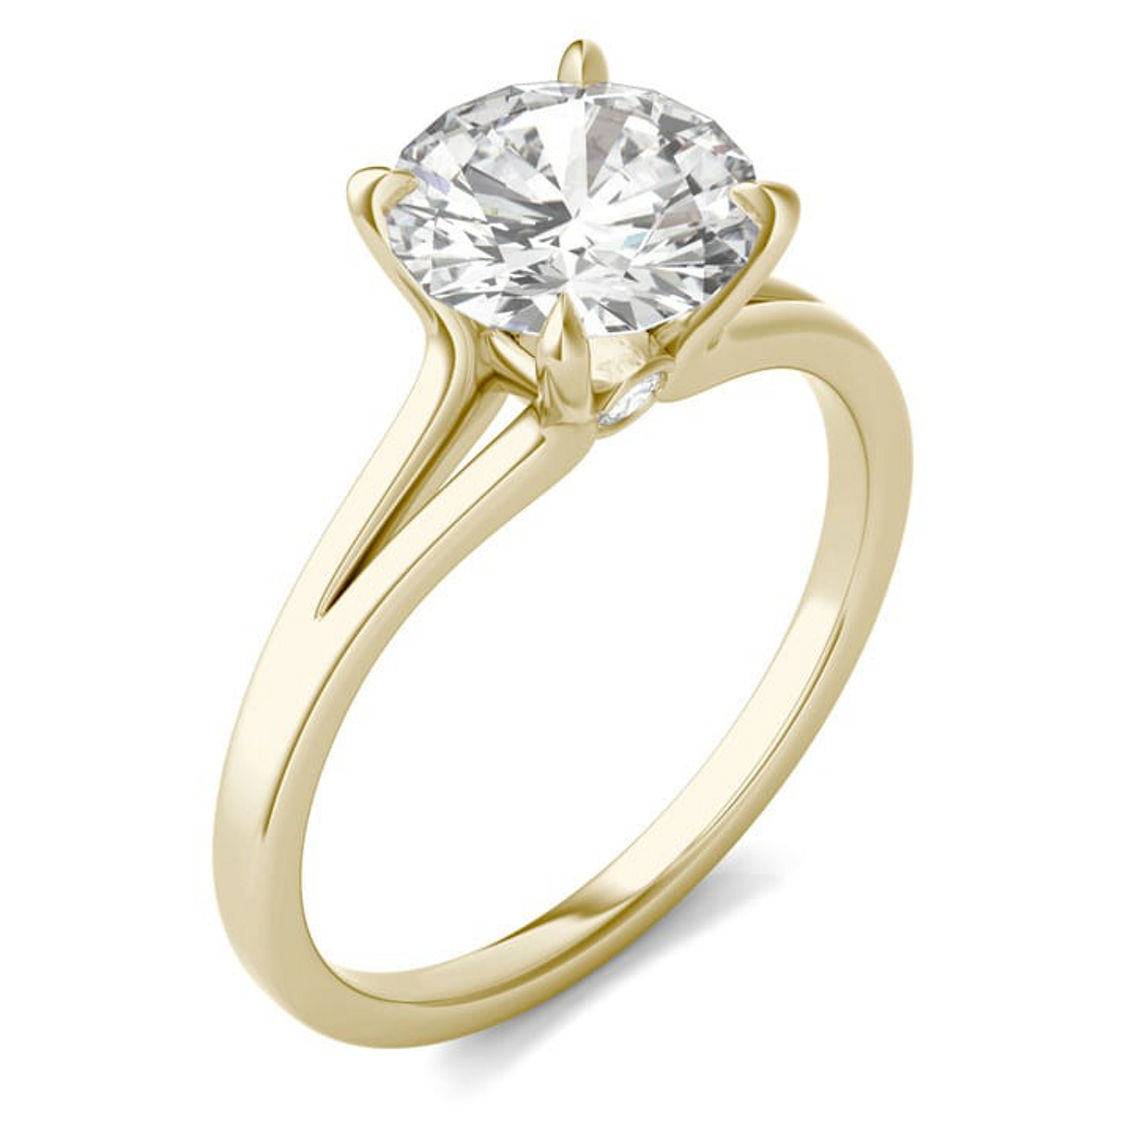 Charles & Colvard 1.96cttw Moissanite Round Solitaire Ring in 14k Yellow Gold - Image 2 of 5